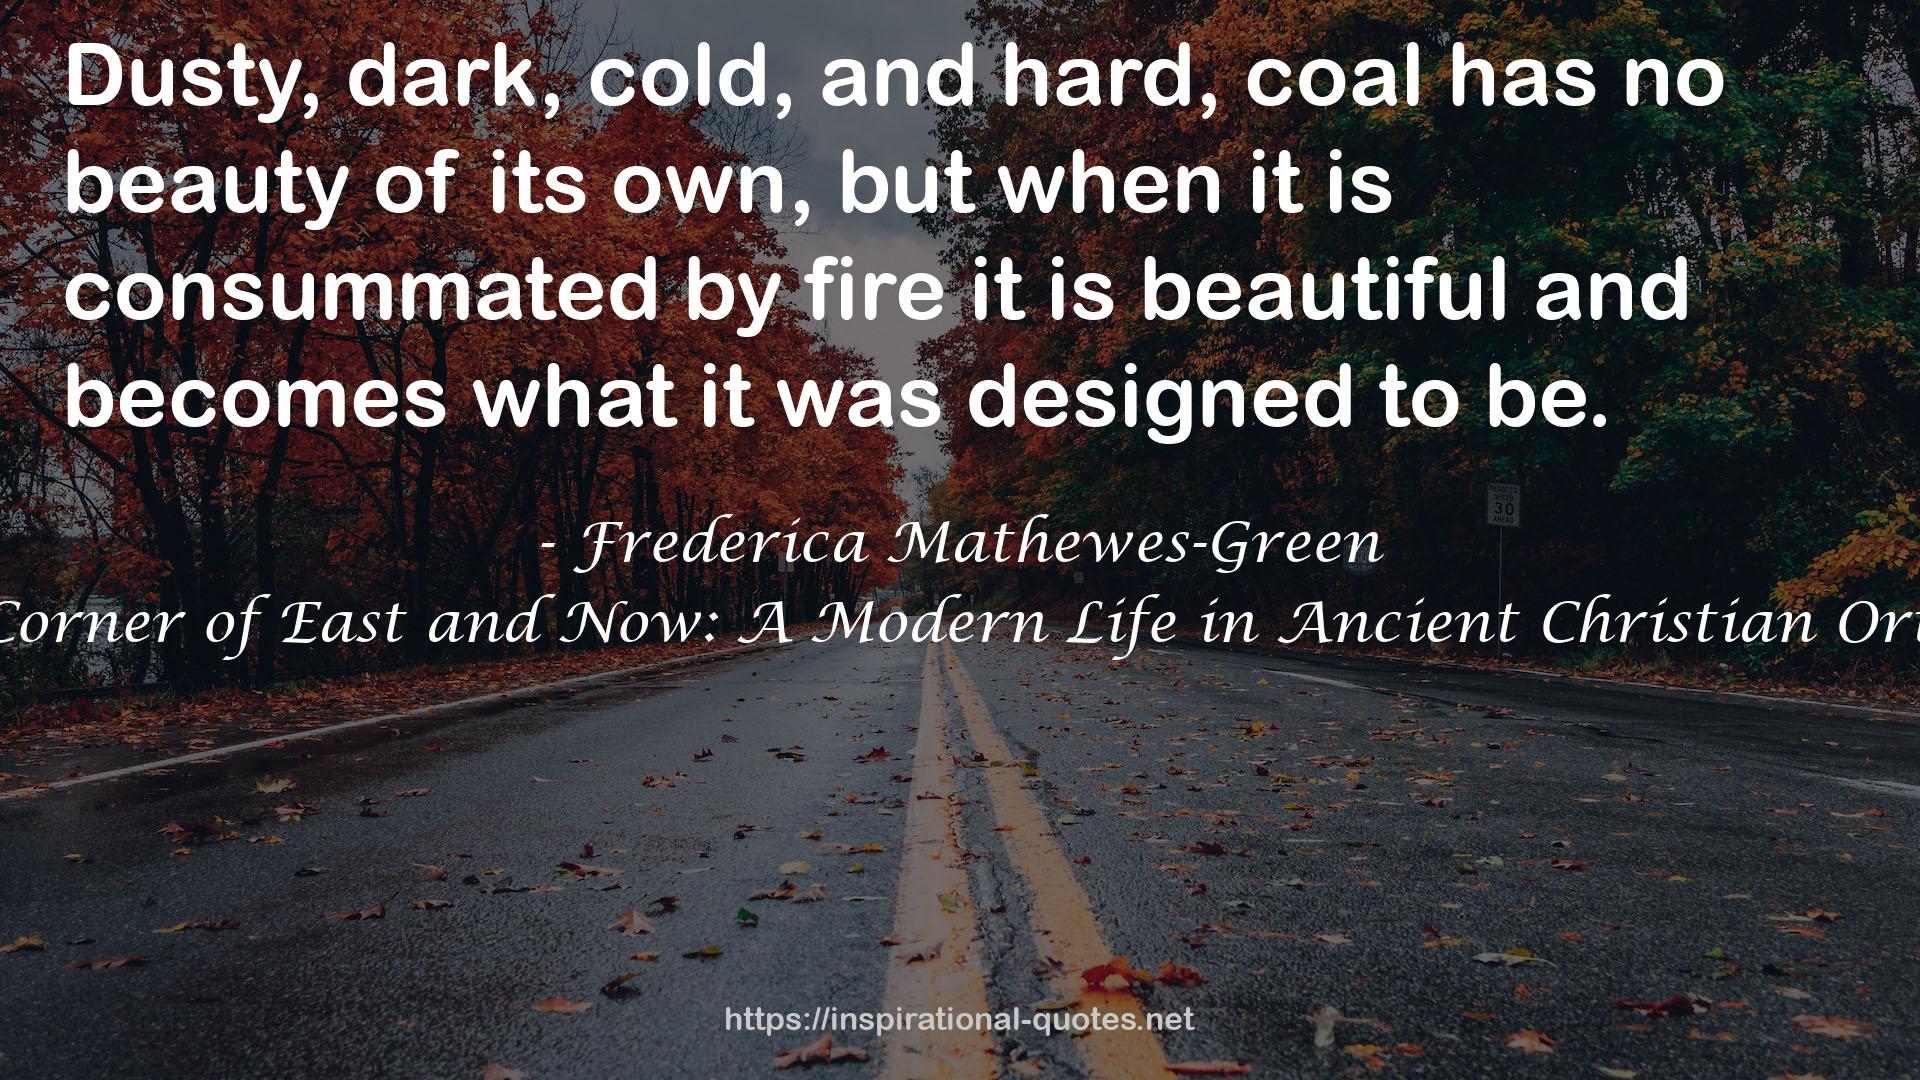 Frederica Mathewes-Green QUOTES